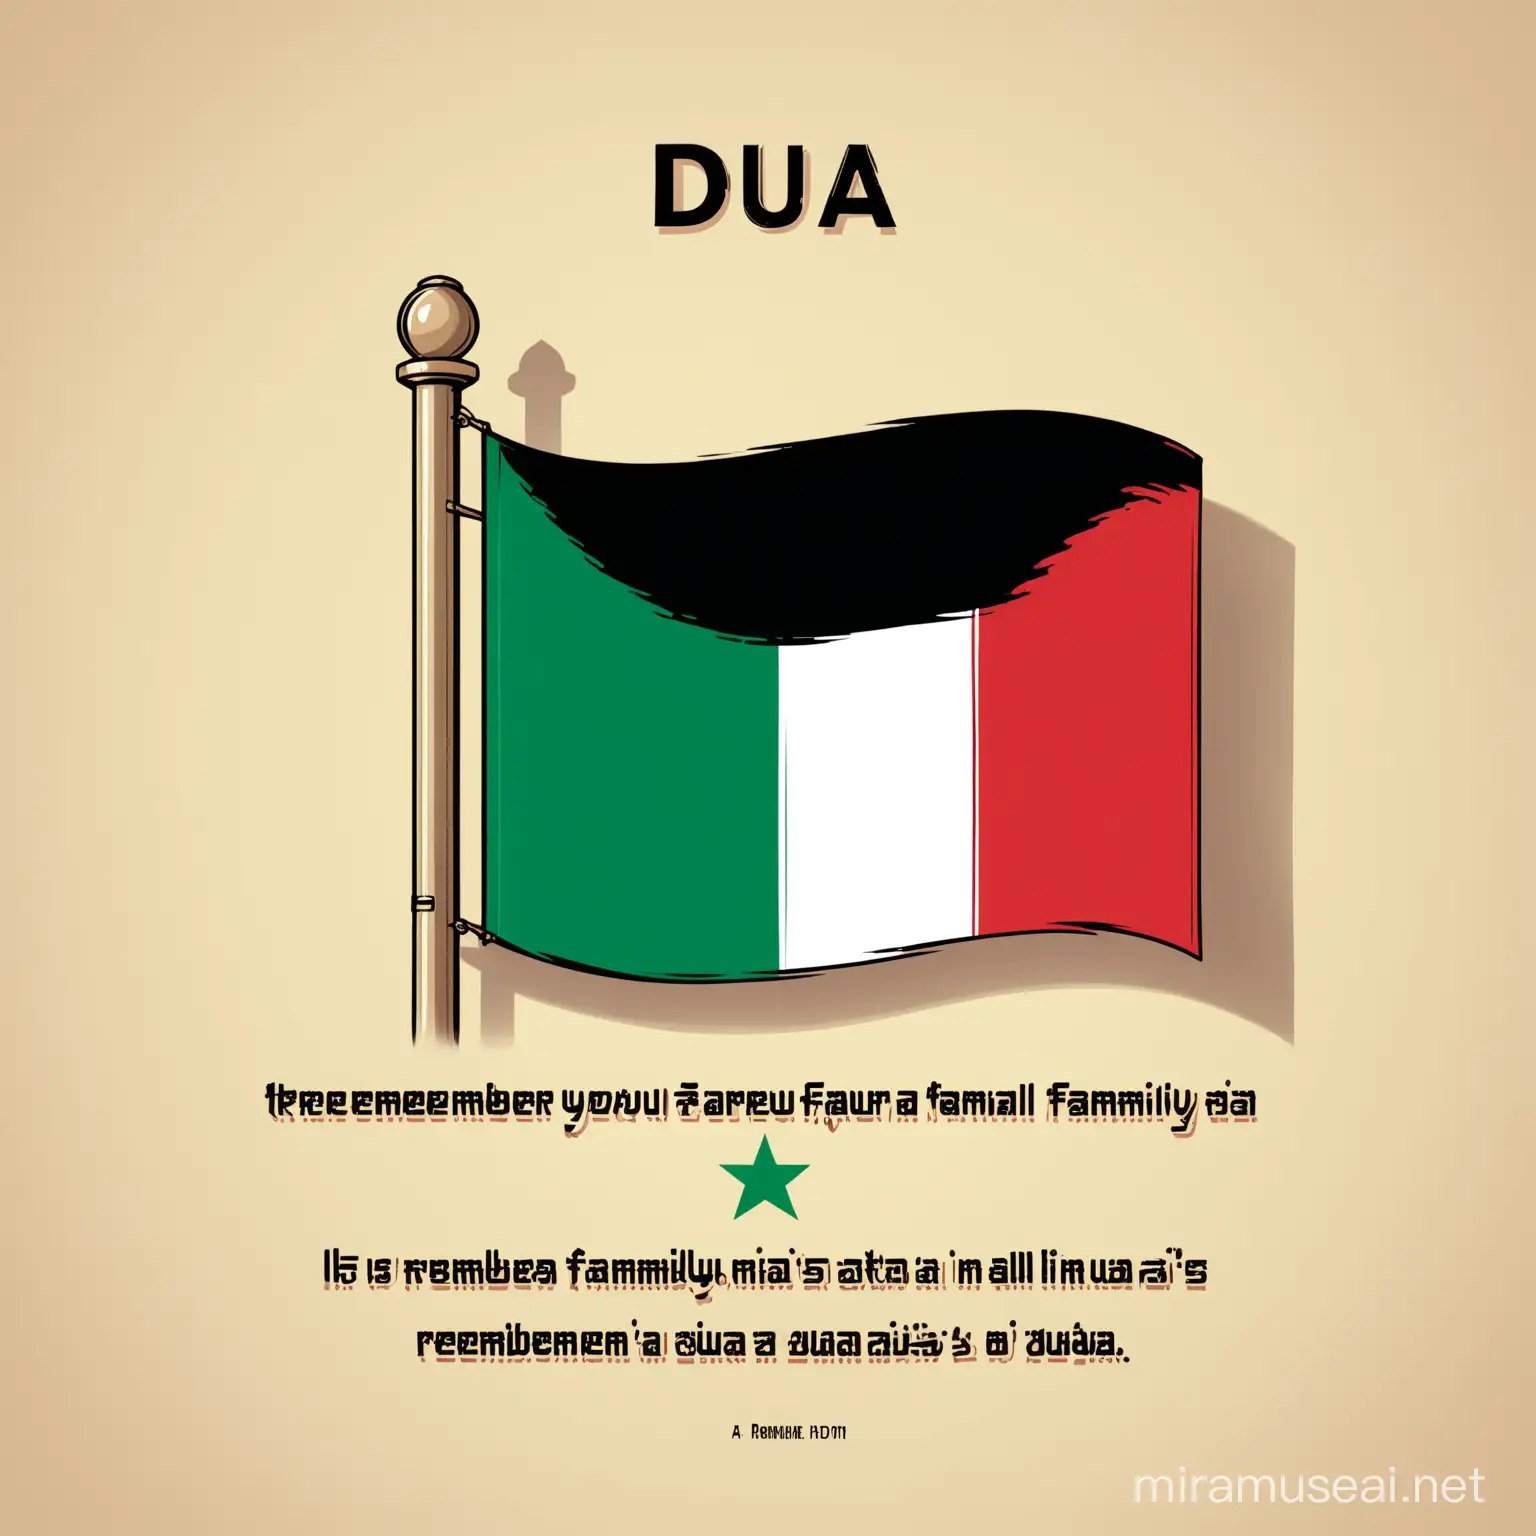 Create a community post in which Palestinian flag is beautifully designed and text written there is"Remember your eternal family in DUA's"